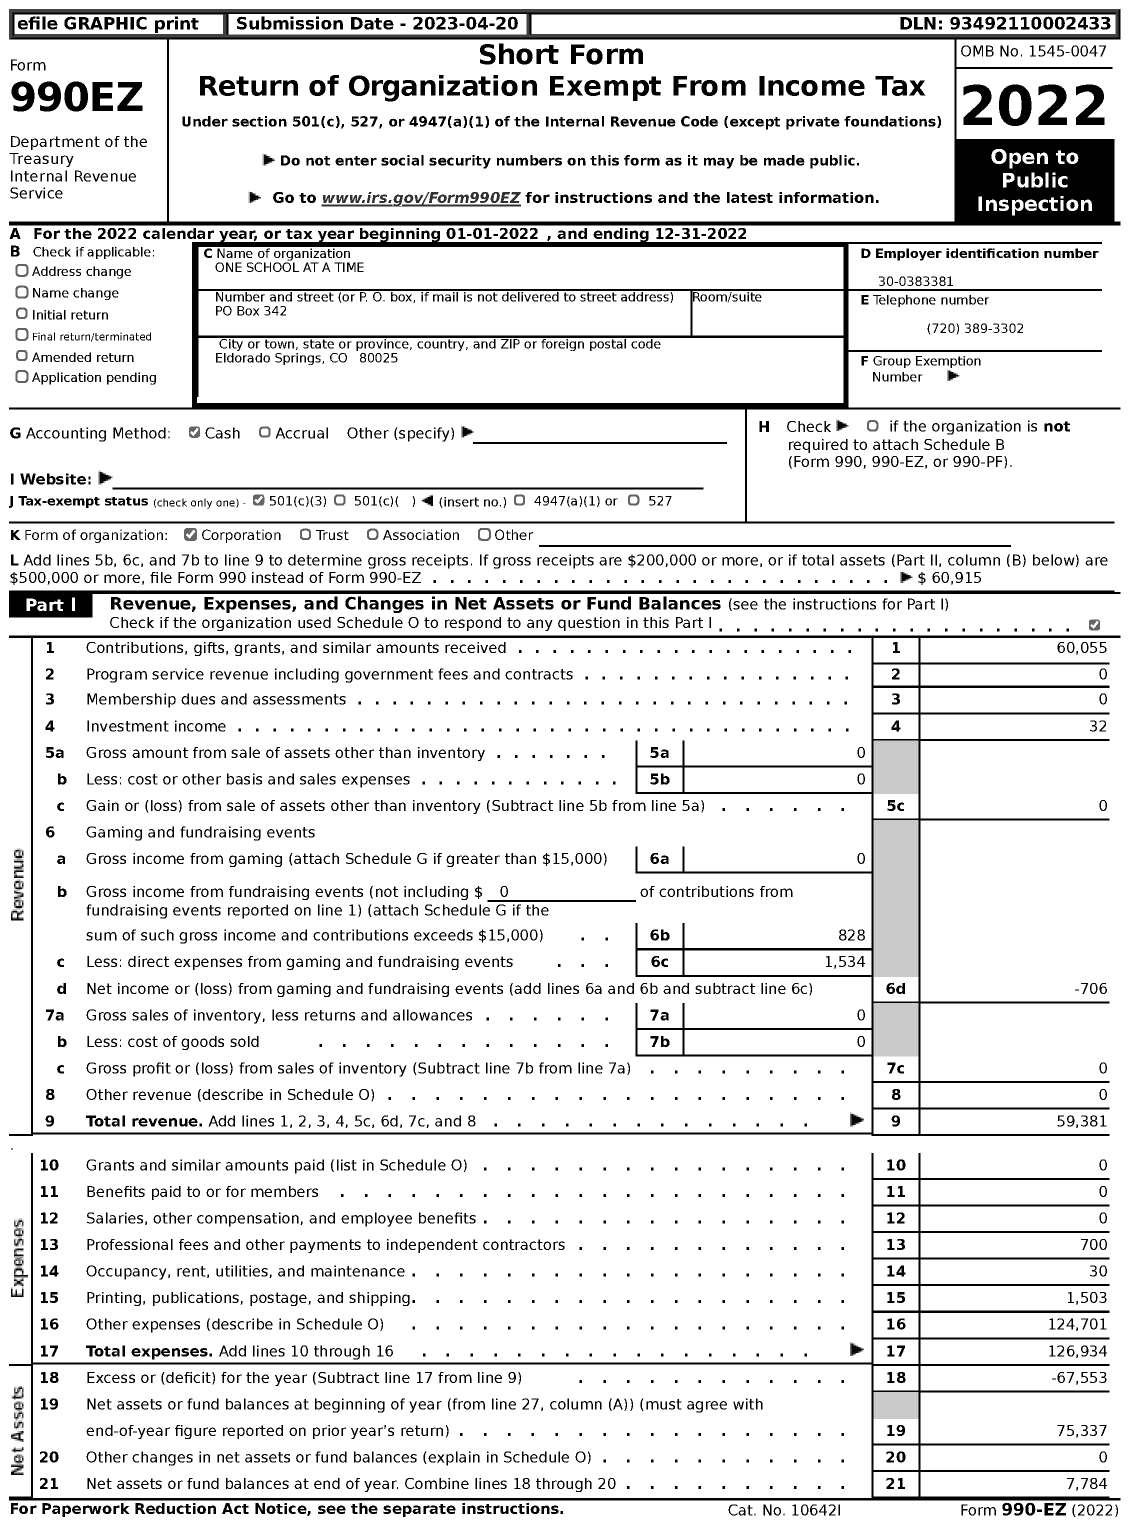 Image of first page of 2022 Form 990EZ for One School at A Time